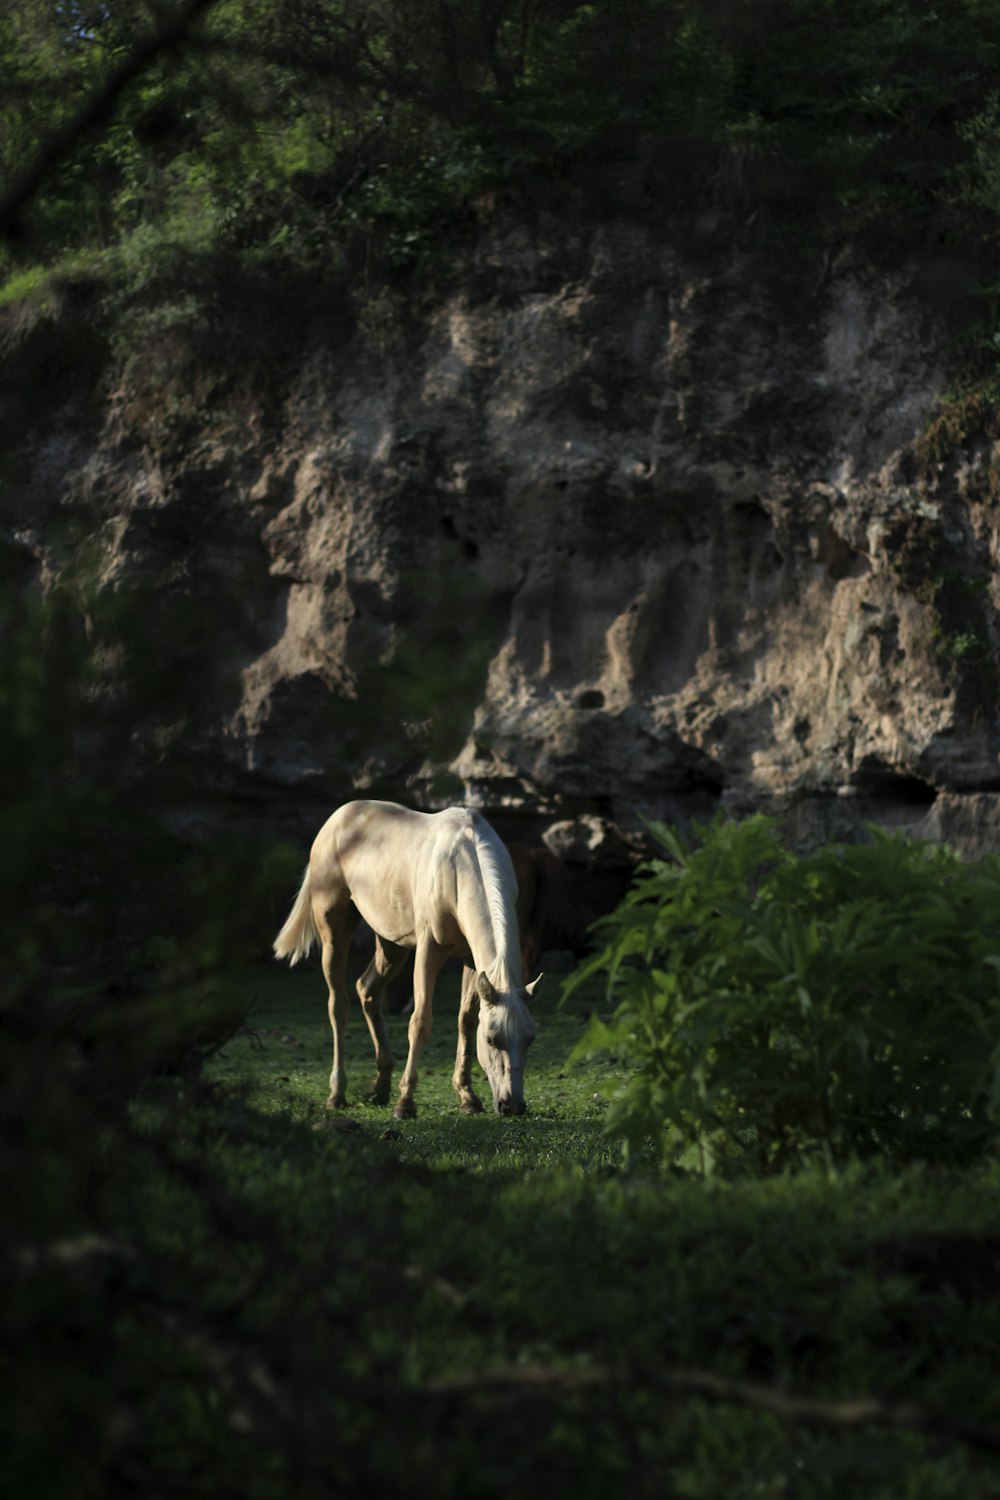 a white horse grazing on a lush green field